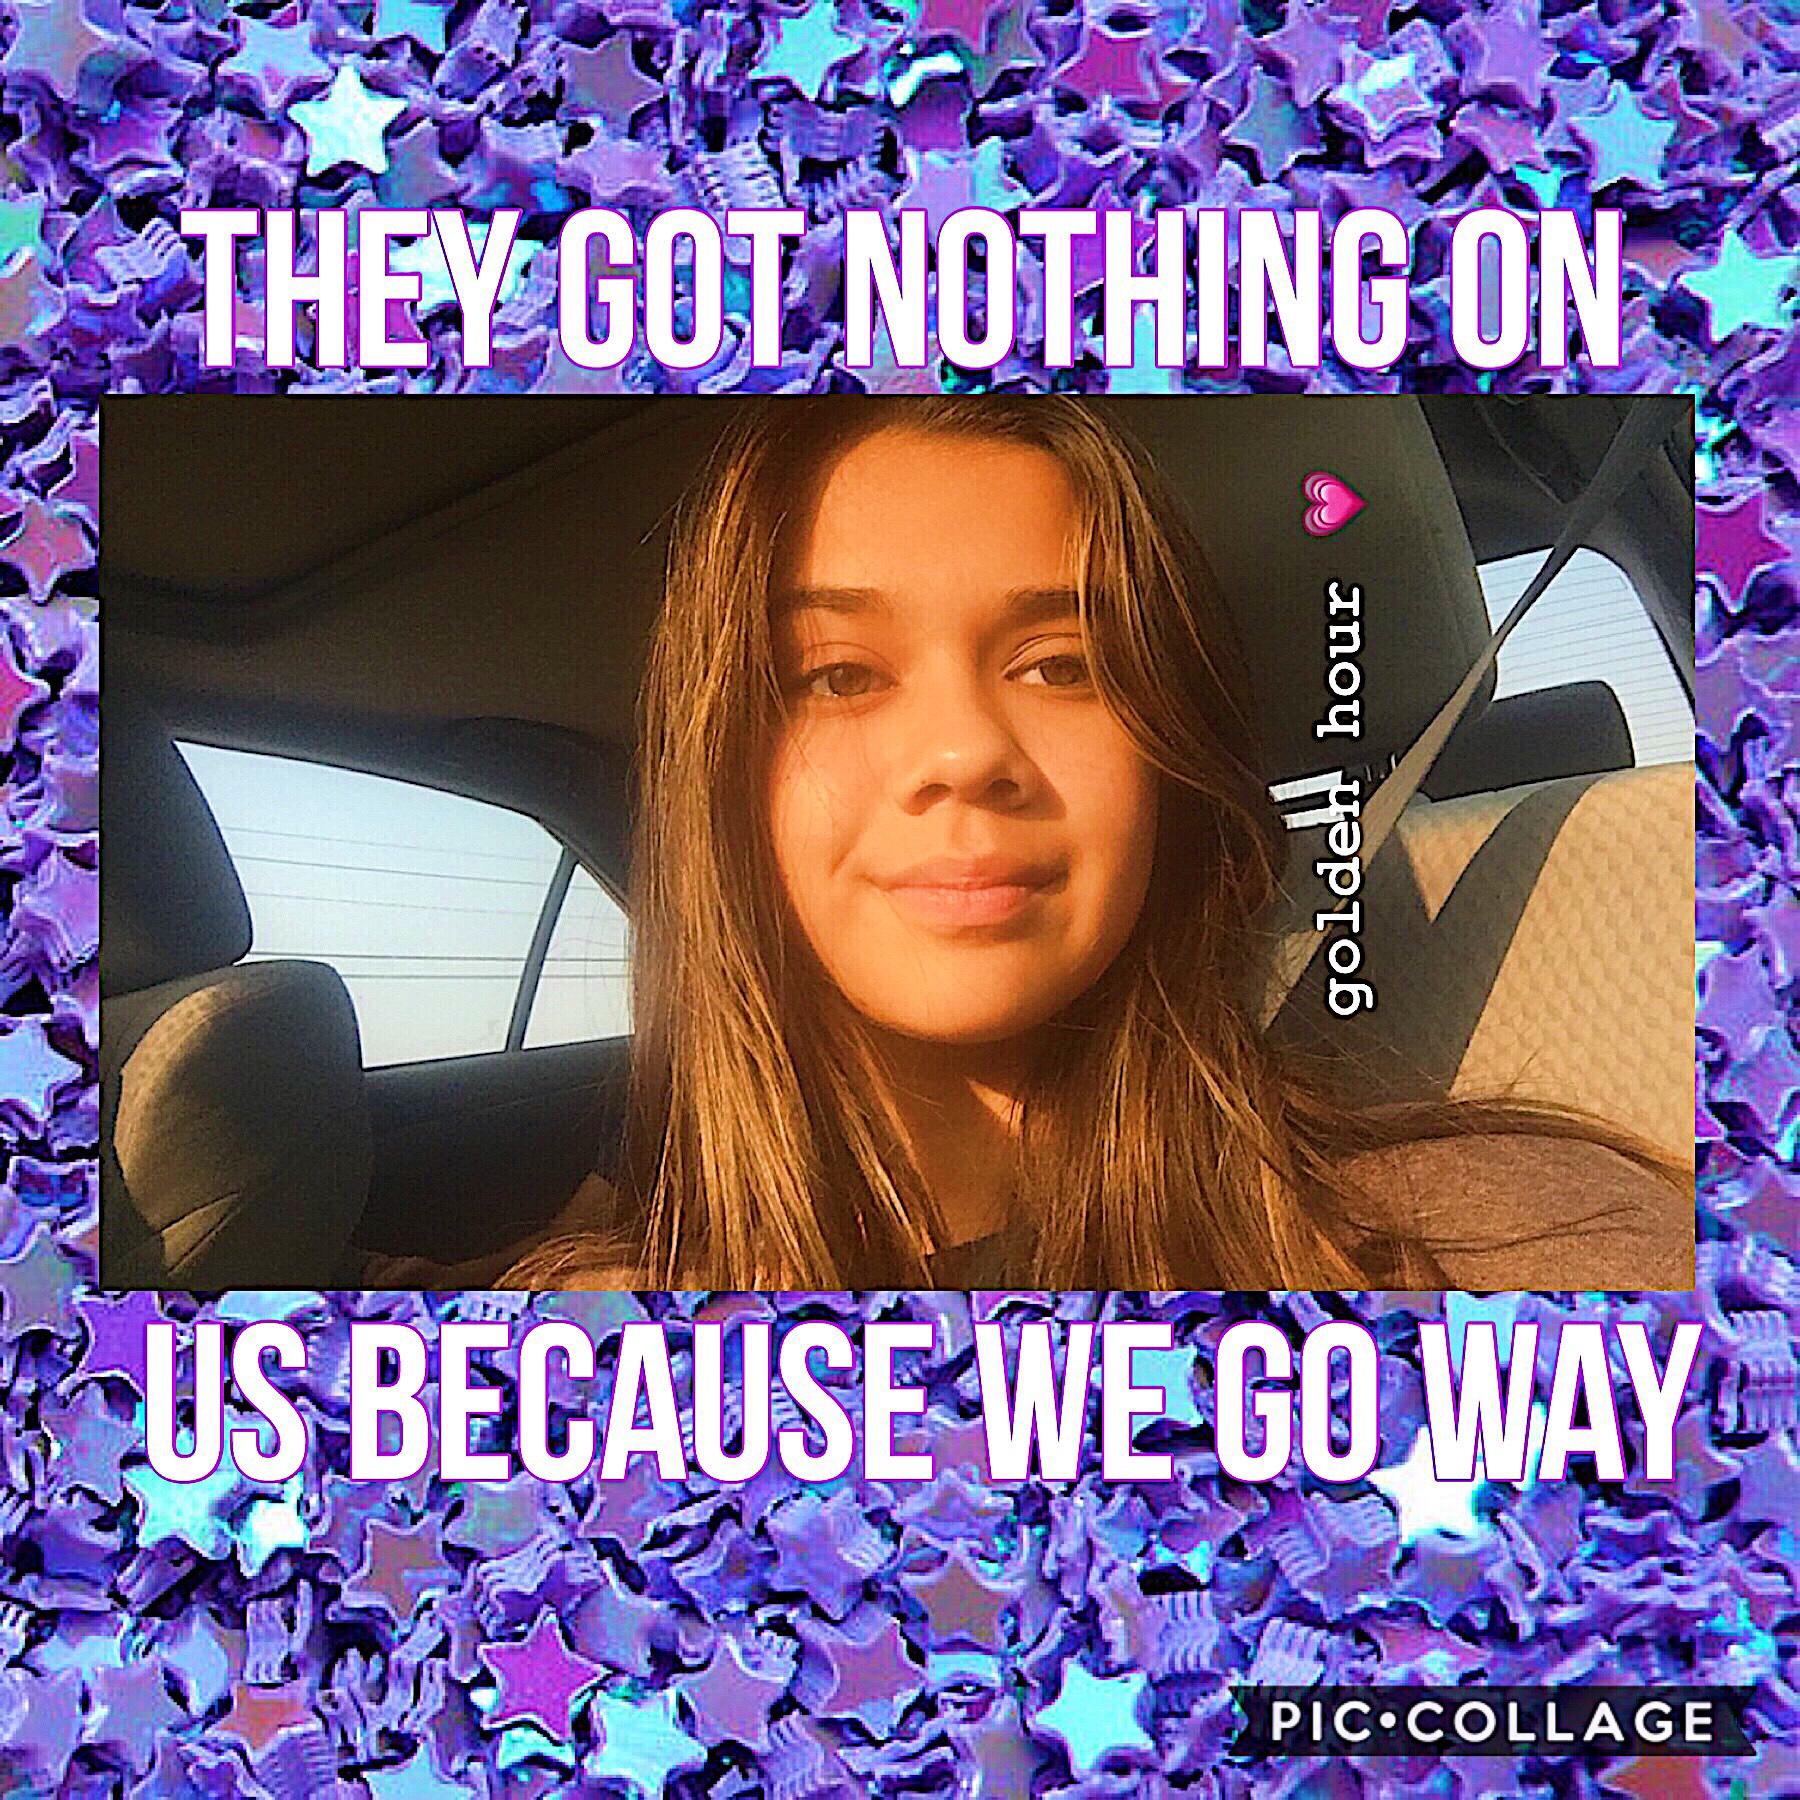 tap 💜
for y’all who haven’t seen my face
im not this tan 😂 it was golden hour when i took this and i added saturation to the photo 😂
i love Kenzie’s song “nothing in us” go listen to it! 
this is legit the only good selfie I’ve took 😂